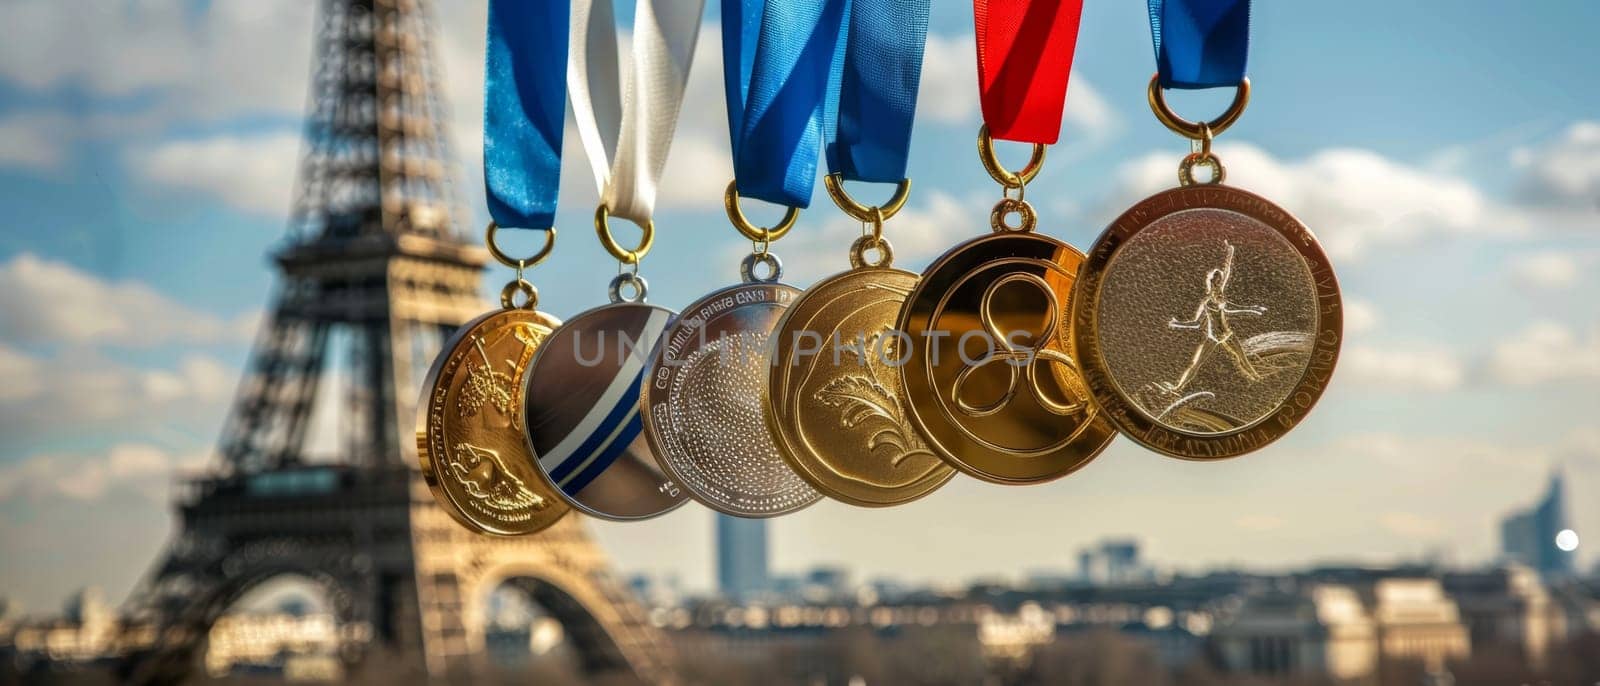 A vibrant array of medals with ribbons in the colors of the French flag are displayed in front of a softly focused Eiffel Tower